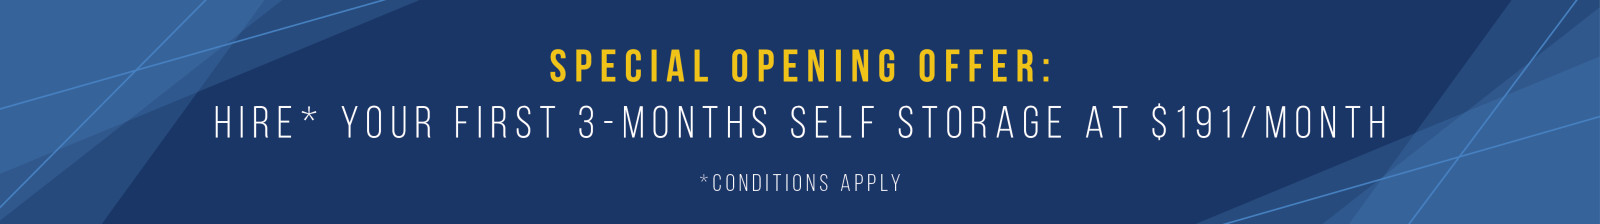 Special opening offer: hire your first 3 months self storage at $191 a month, conditions apply.